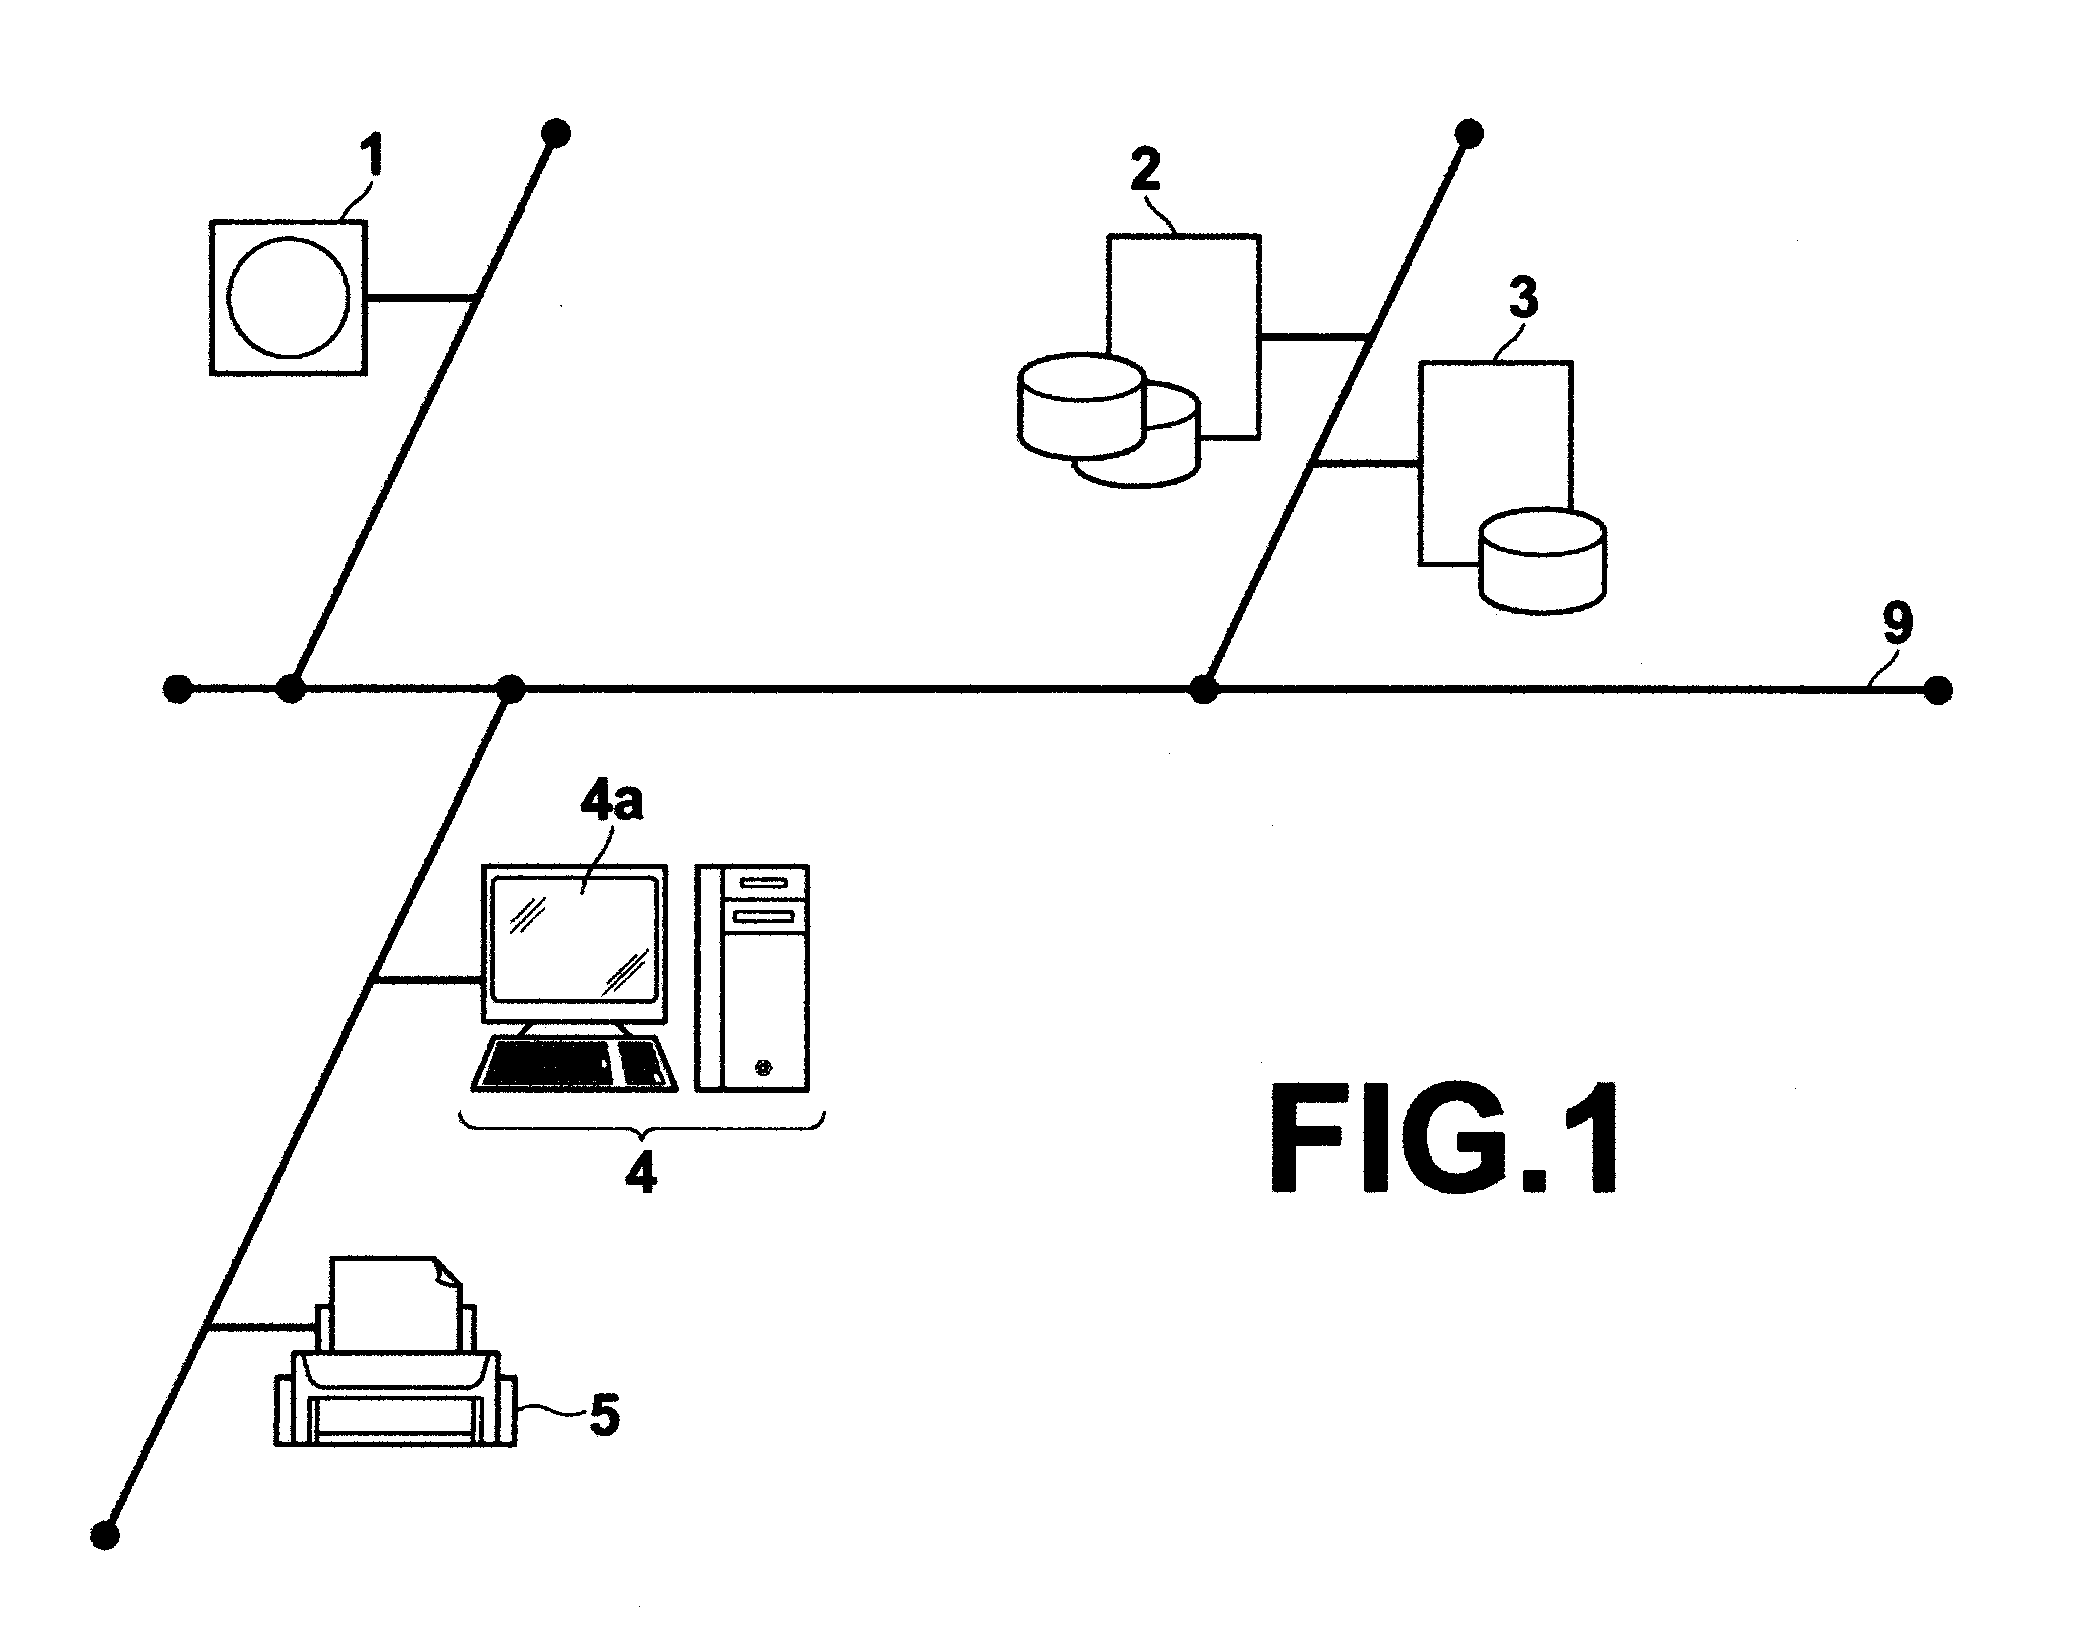 Apparatus and method for generating stereoscopic viewing image based on three-dimensional medical image, and a computer readable recording medium on which is recorded a program for the same